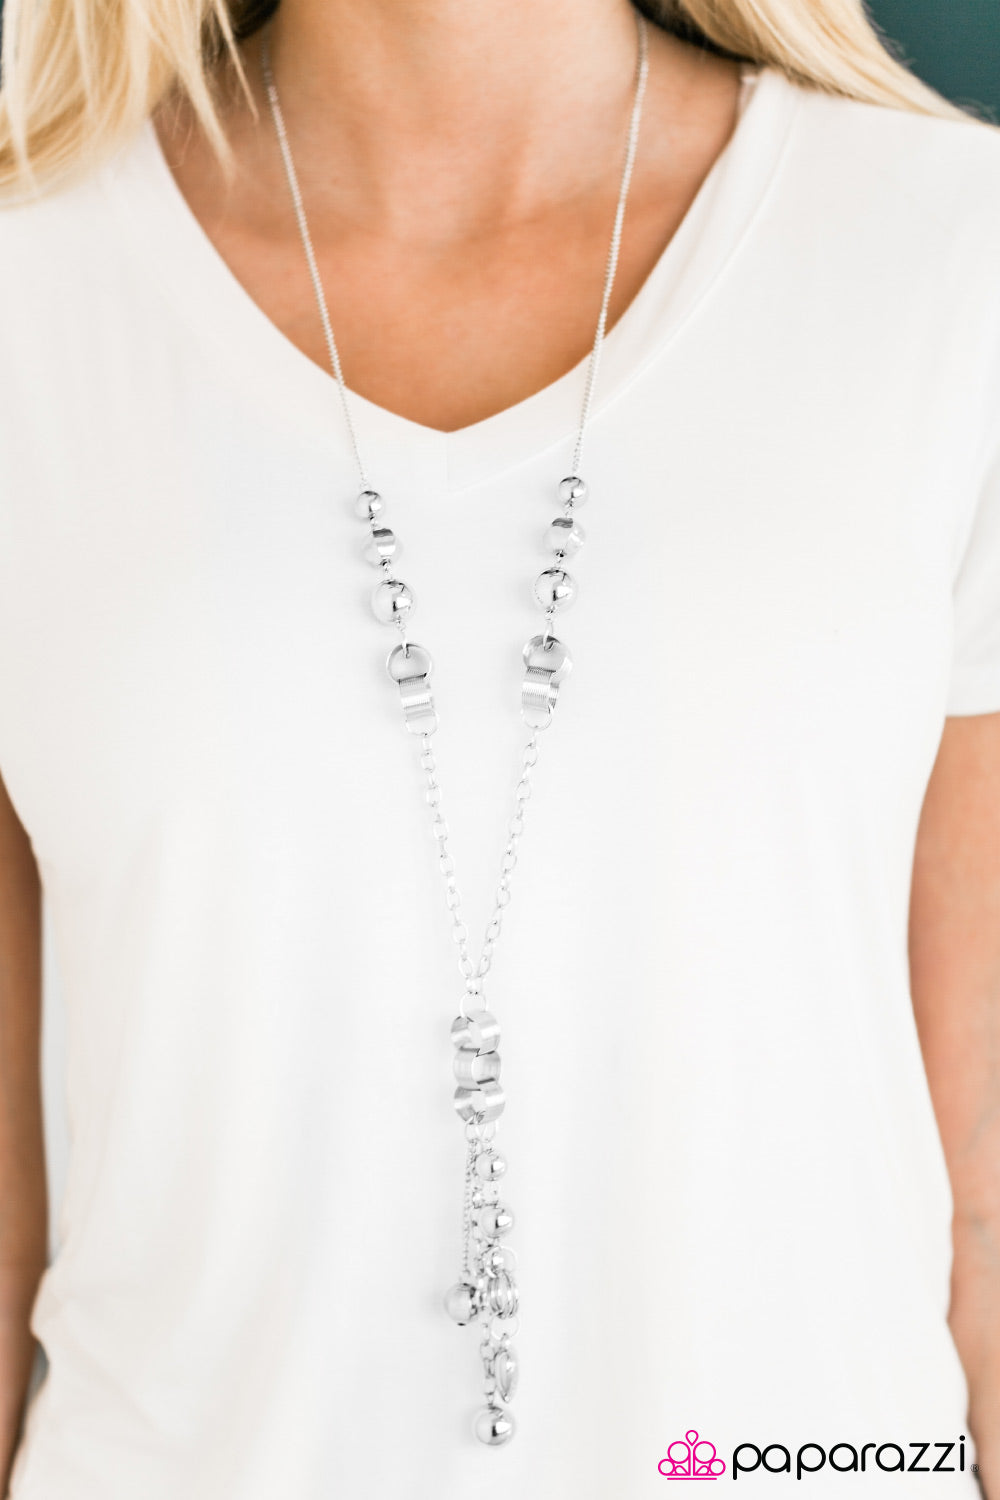 Instant Connection - Silver - Paparazzi necklace